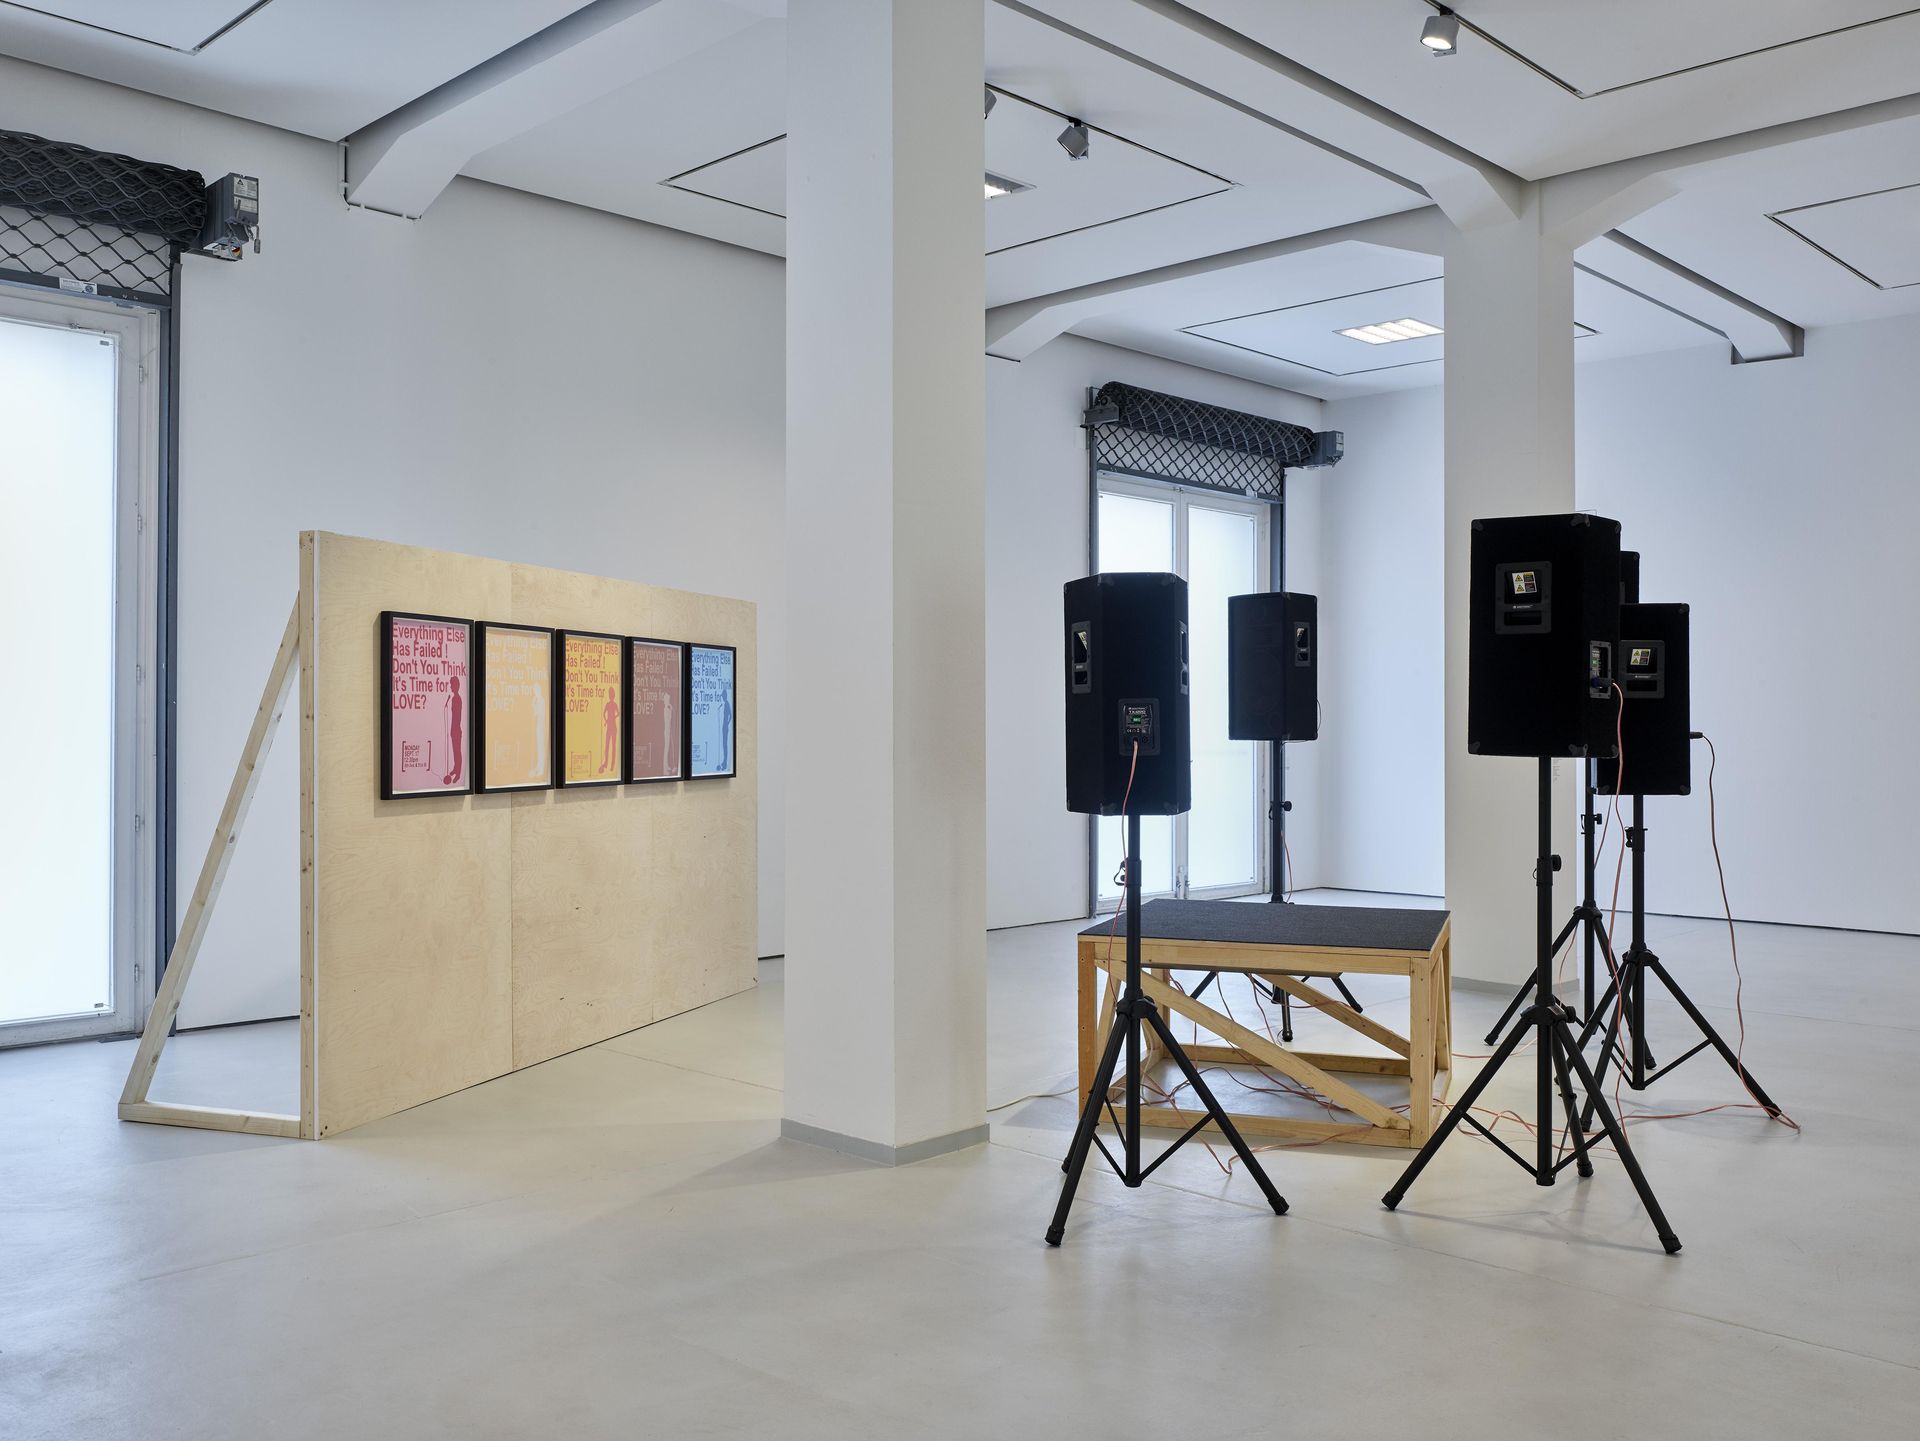 Installation view Sharon Hayes, Everything Else Has Failed! Don't You Think It's Time For Love?, 2007 in KAI 10 | ARTHENA FOUNDATION / Courtesy the artist and Tanya Leighton, Berlin / Photo: Achim Kukulies, Düsseldorf